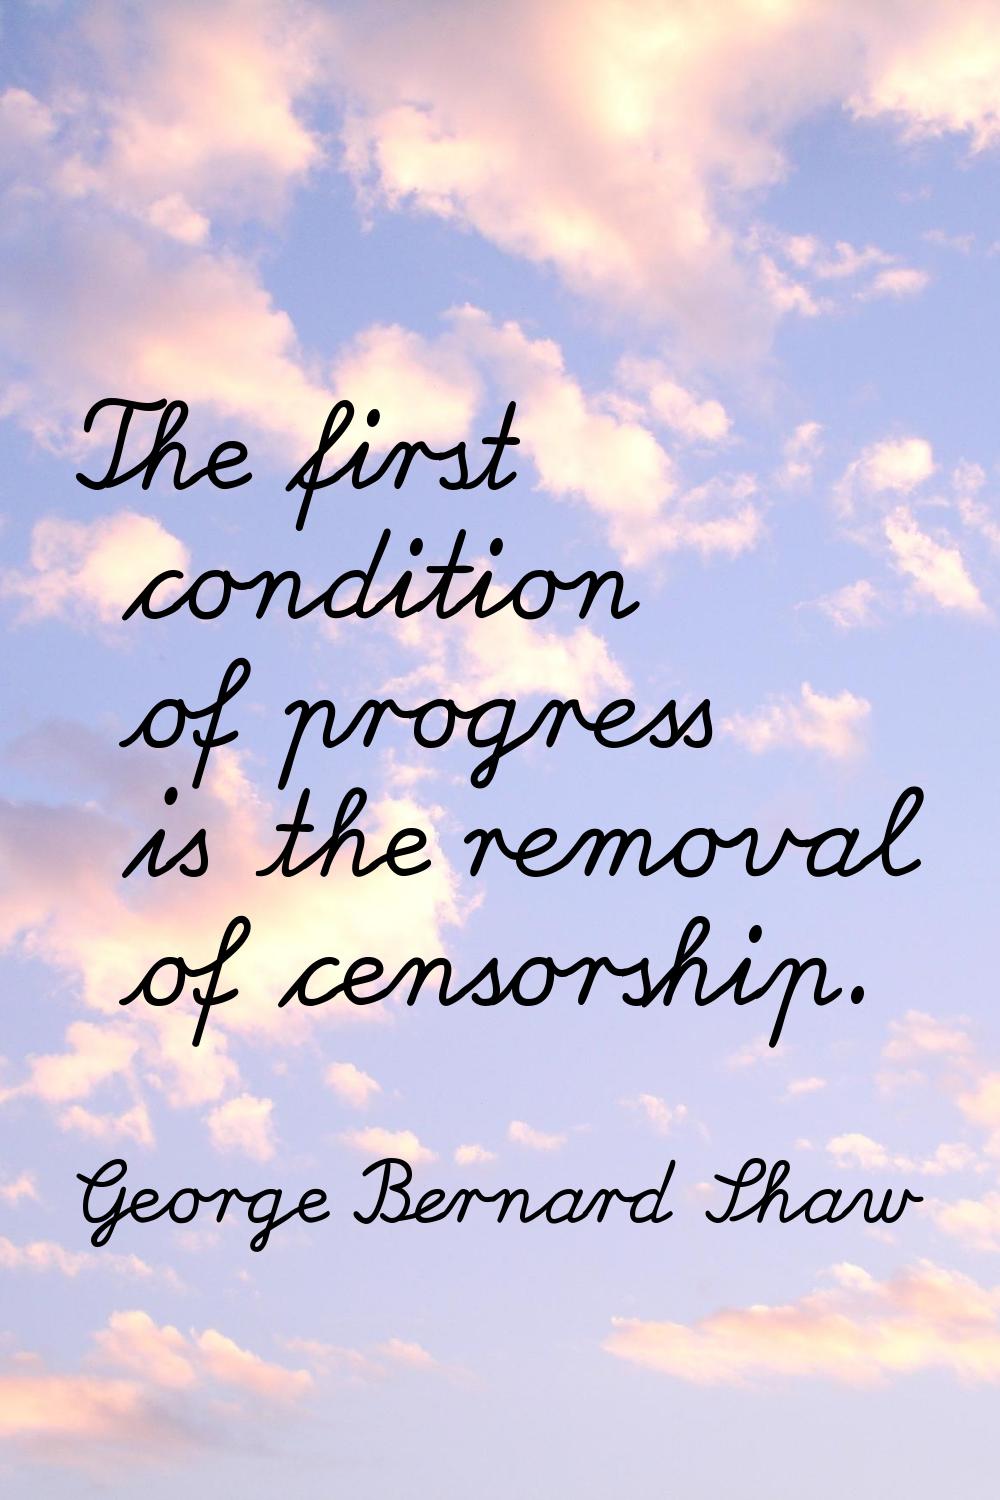 The first condition of progress is the removal of censorship.